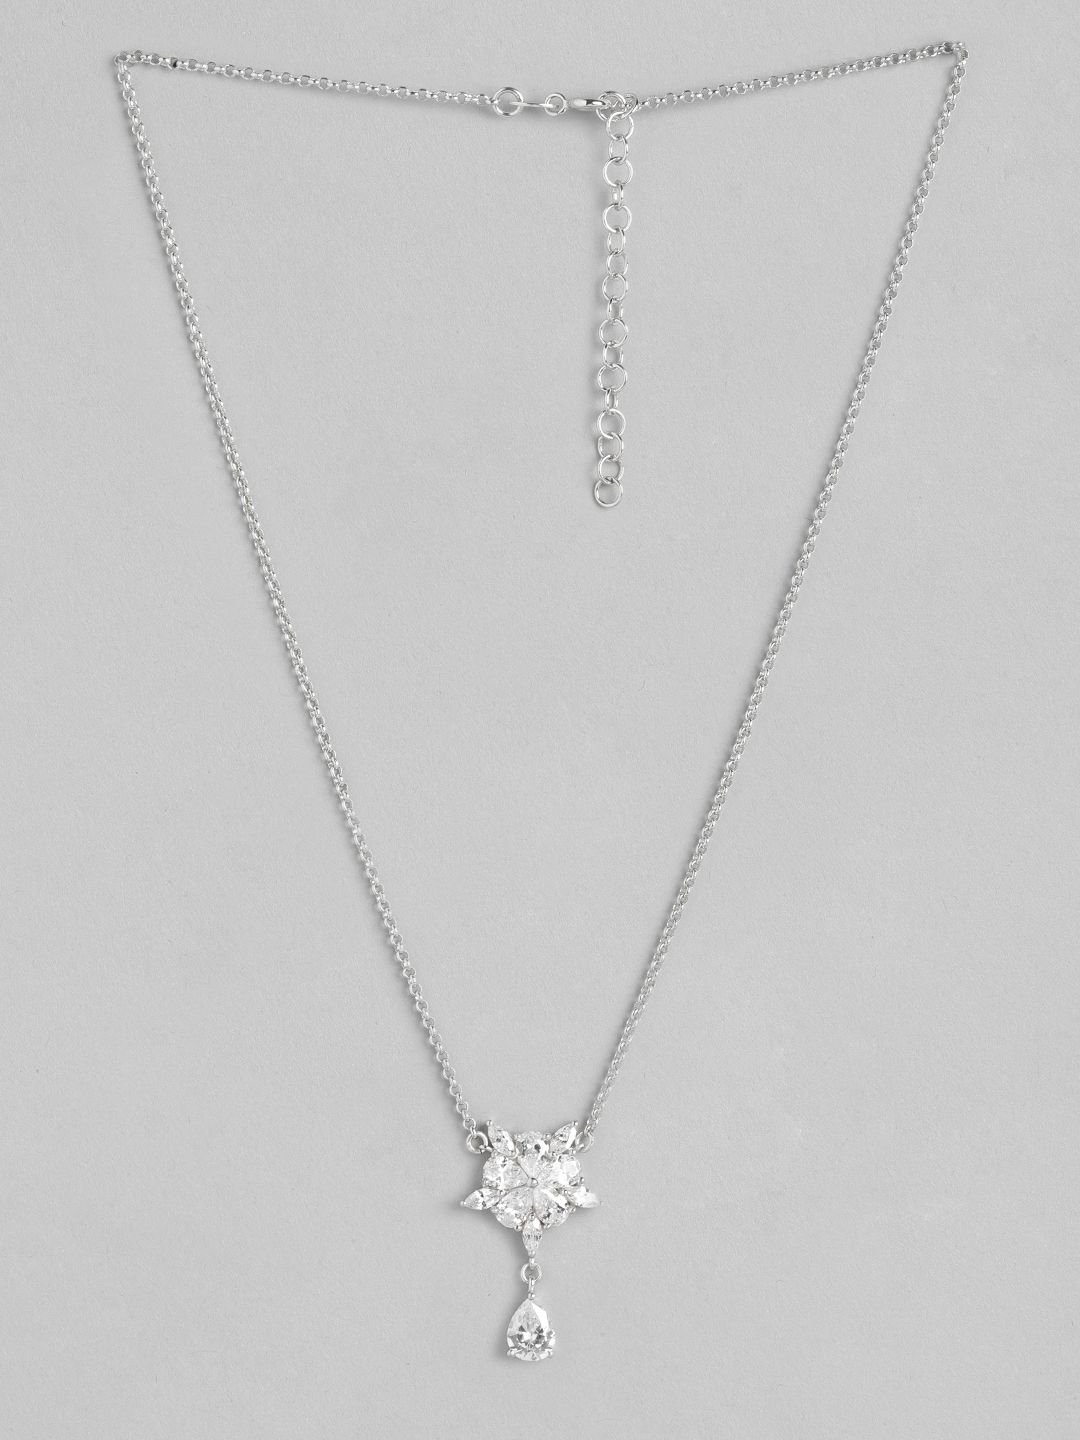 Carlton London Silver-Toned Rhodium-Plated CZ Studded Star Textured Link Necklace Price in India